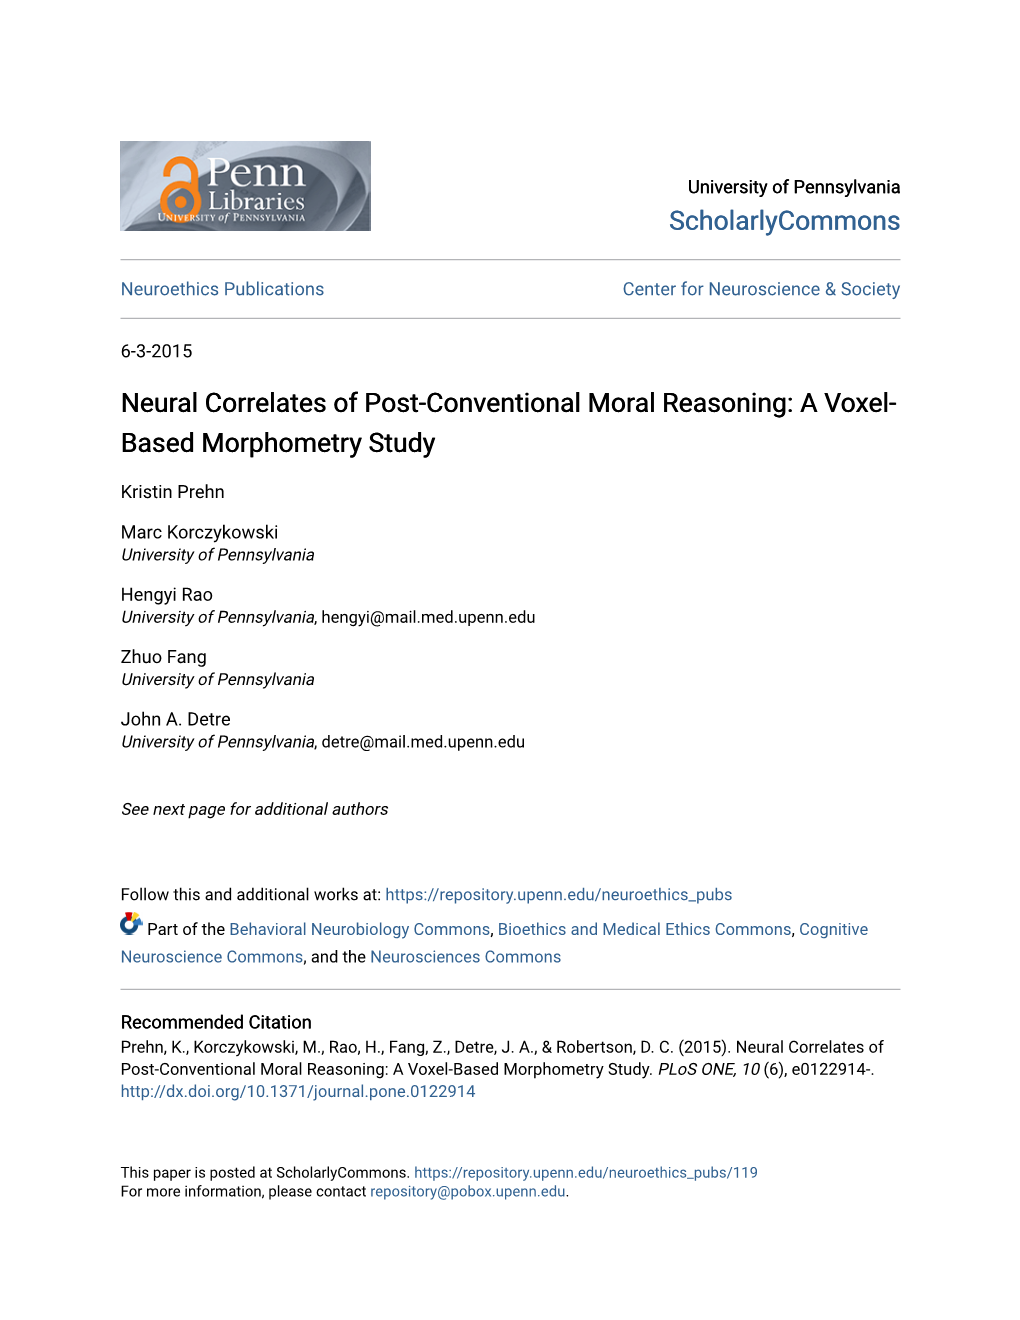 Neural Correlates of Post-Conventional Moral Reasoning: a Voxel- Based Morphometry Study